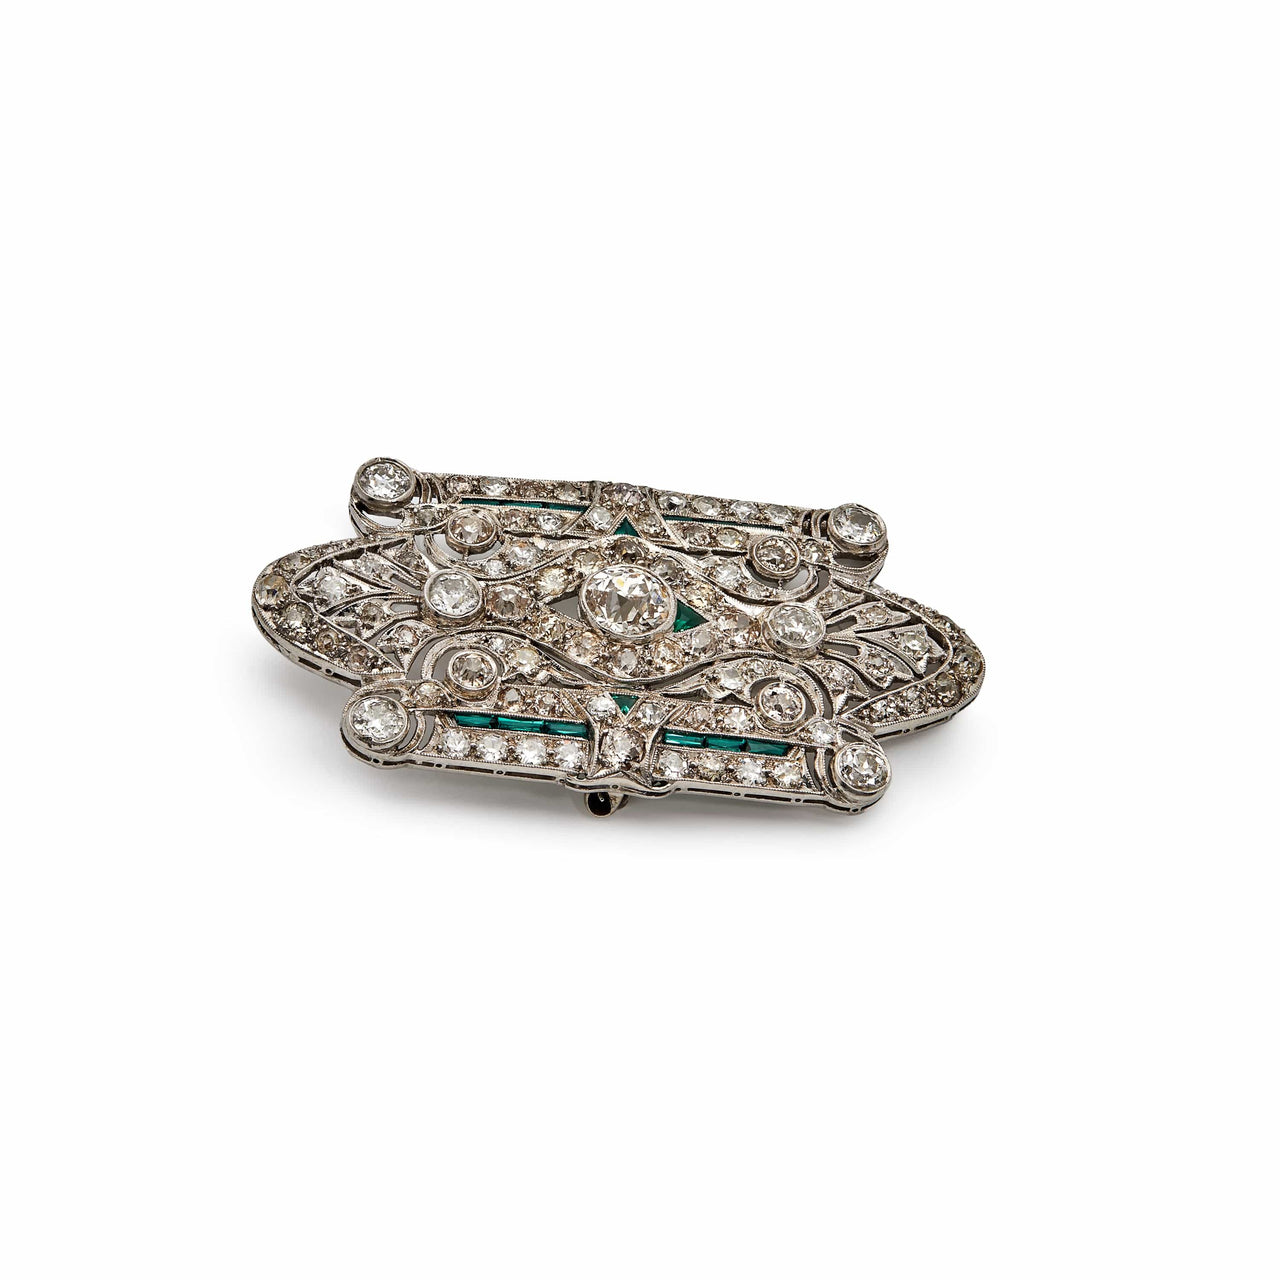 Antique Brooch Diamonds and Emeralds